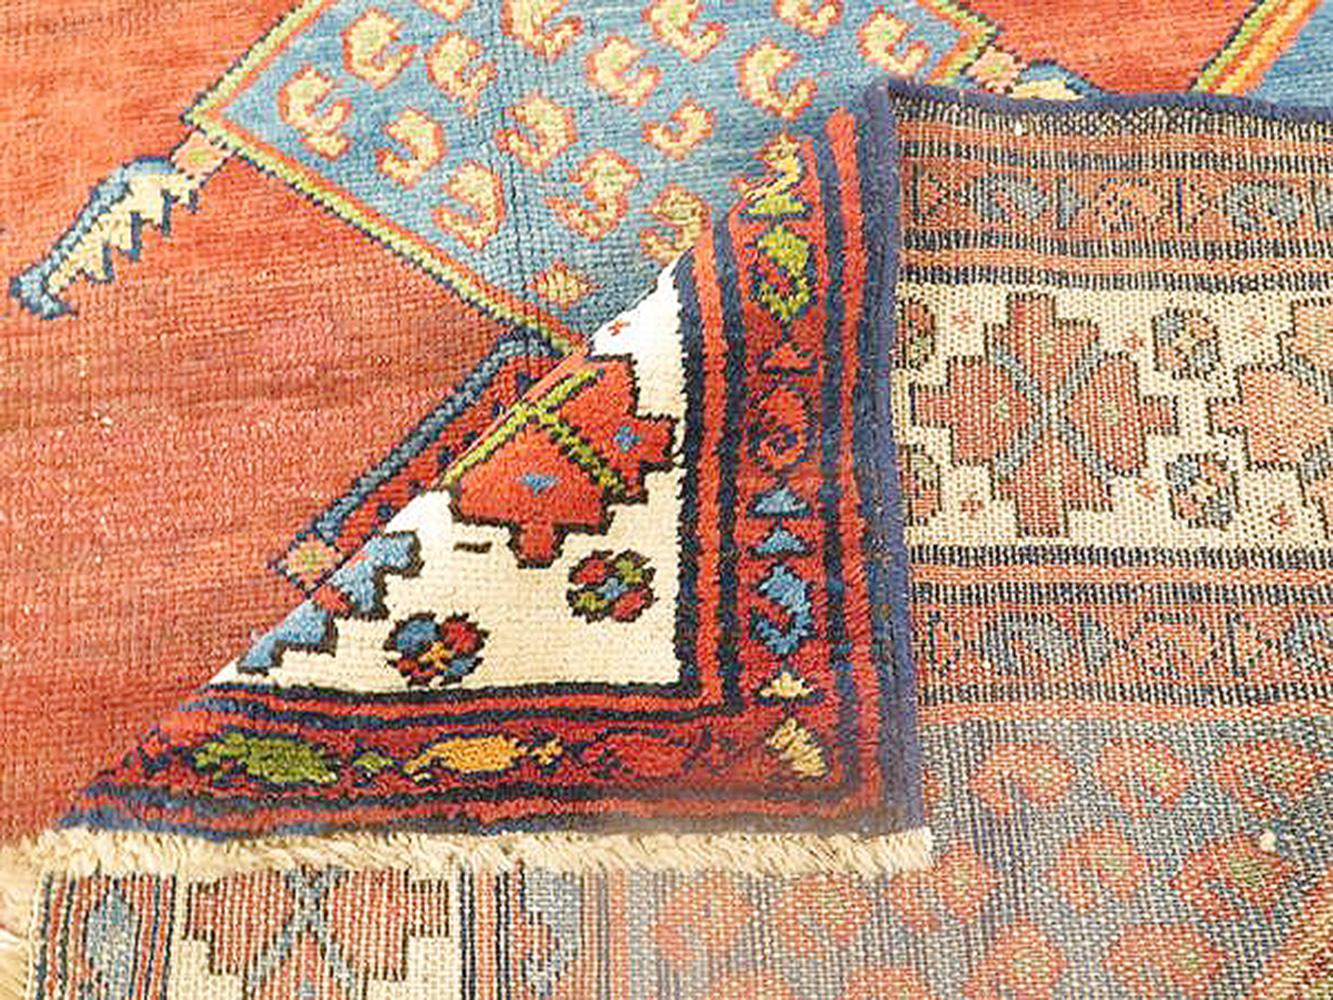 Hand-Woven Antique Persian Hamadan Rug with Blue and Red Floral Details on Ivory Field For Sale